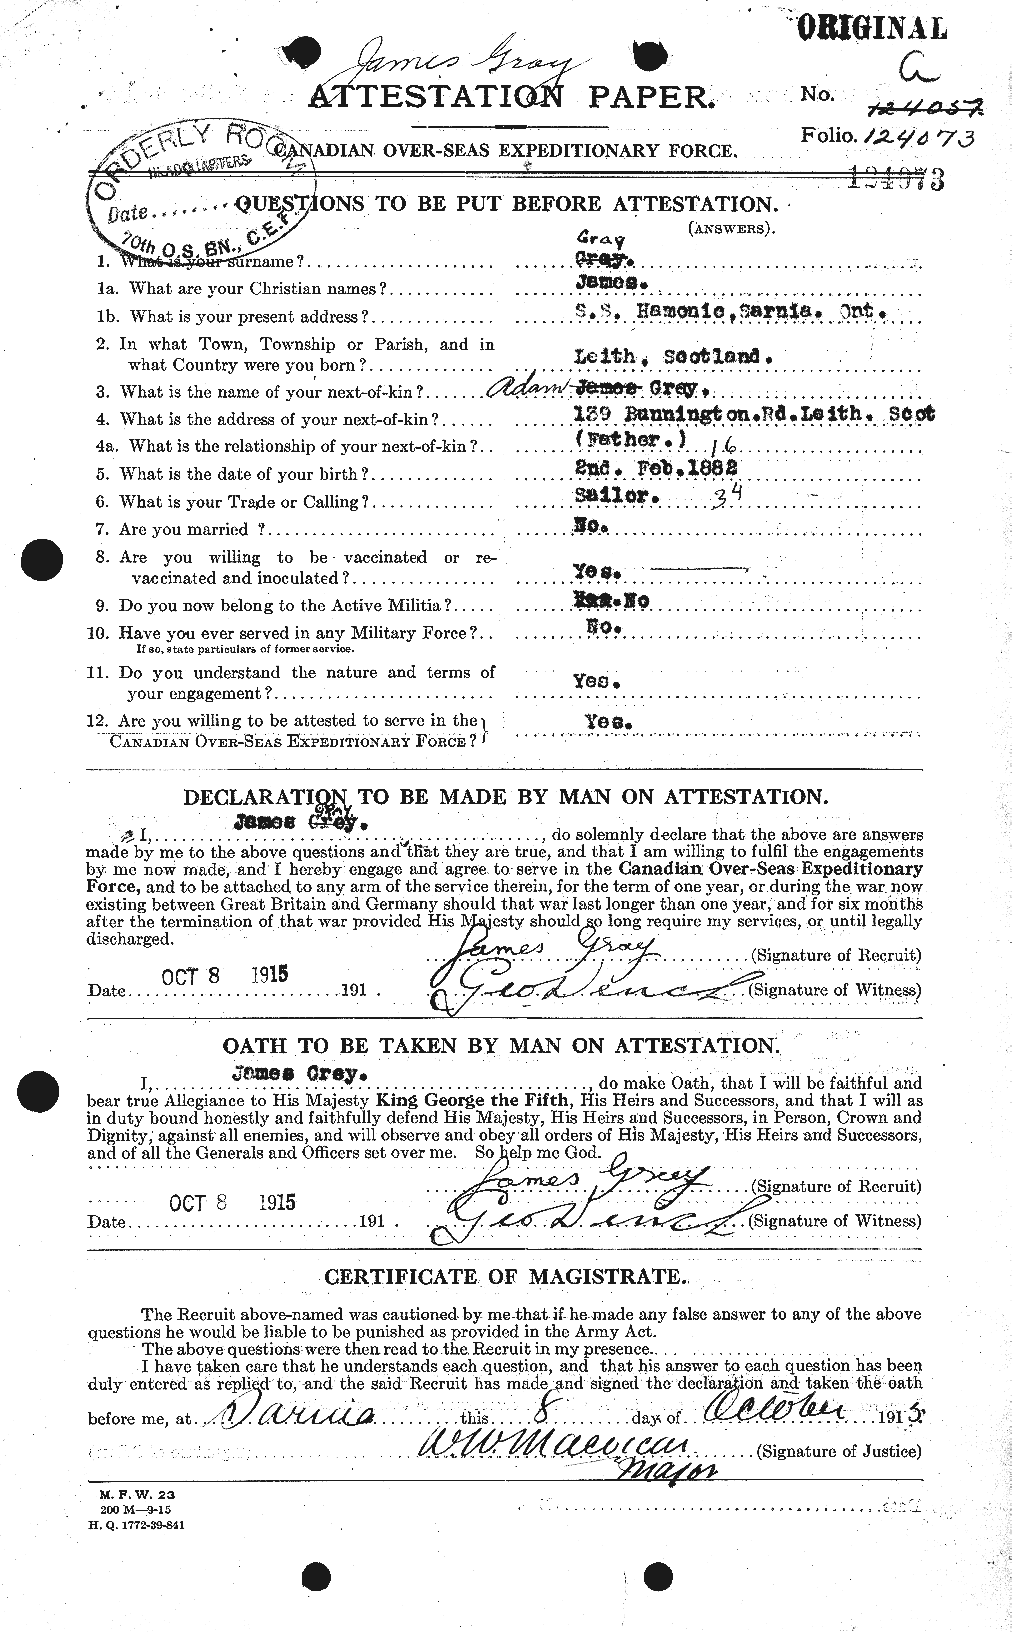 Personnel Records of the First World War - CEF 363281a